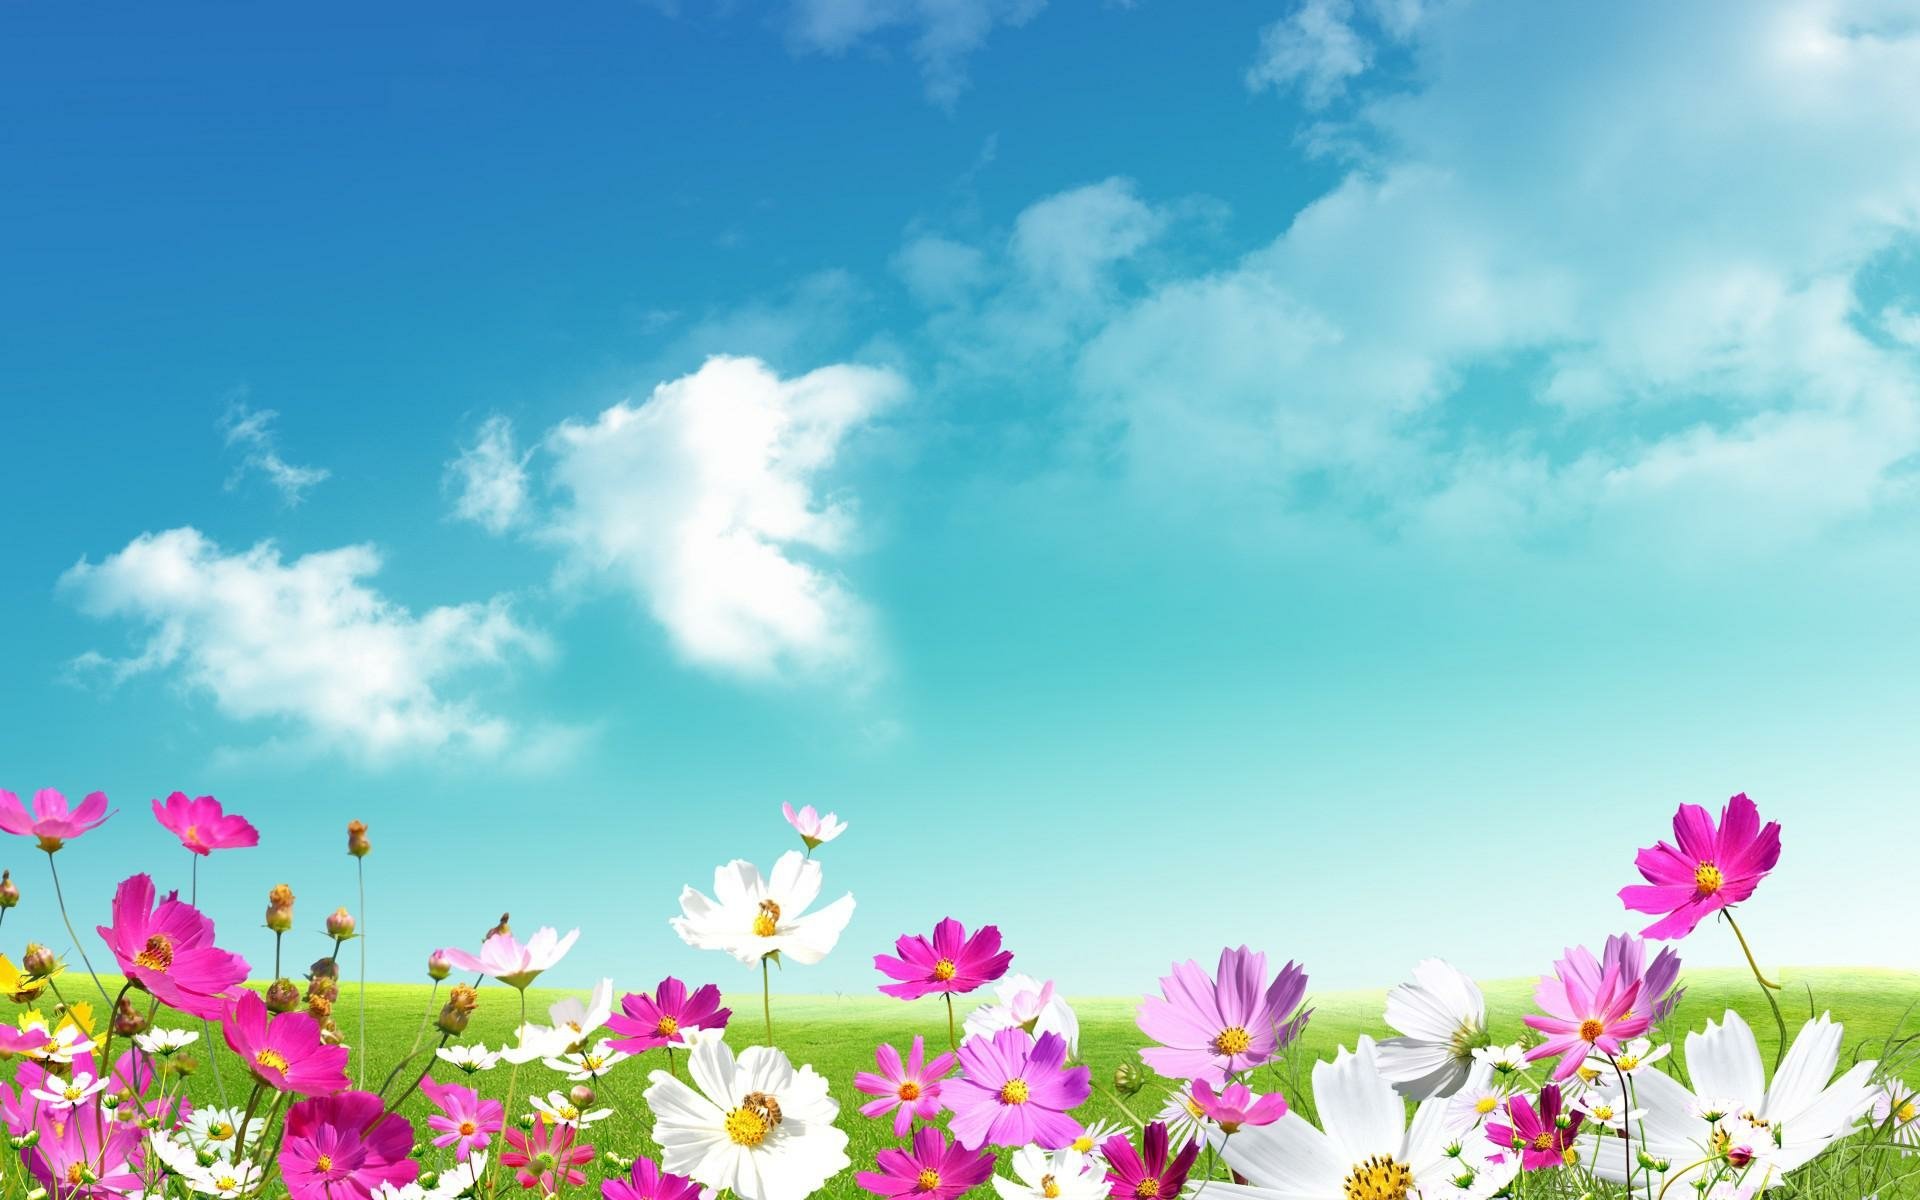 Welcome Spring Wallpaper